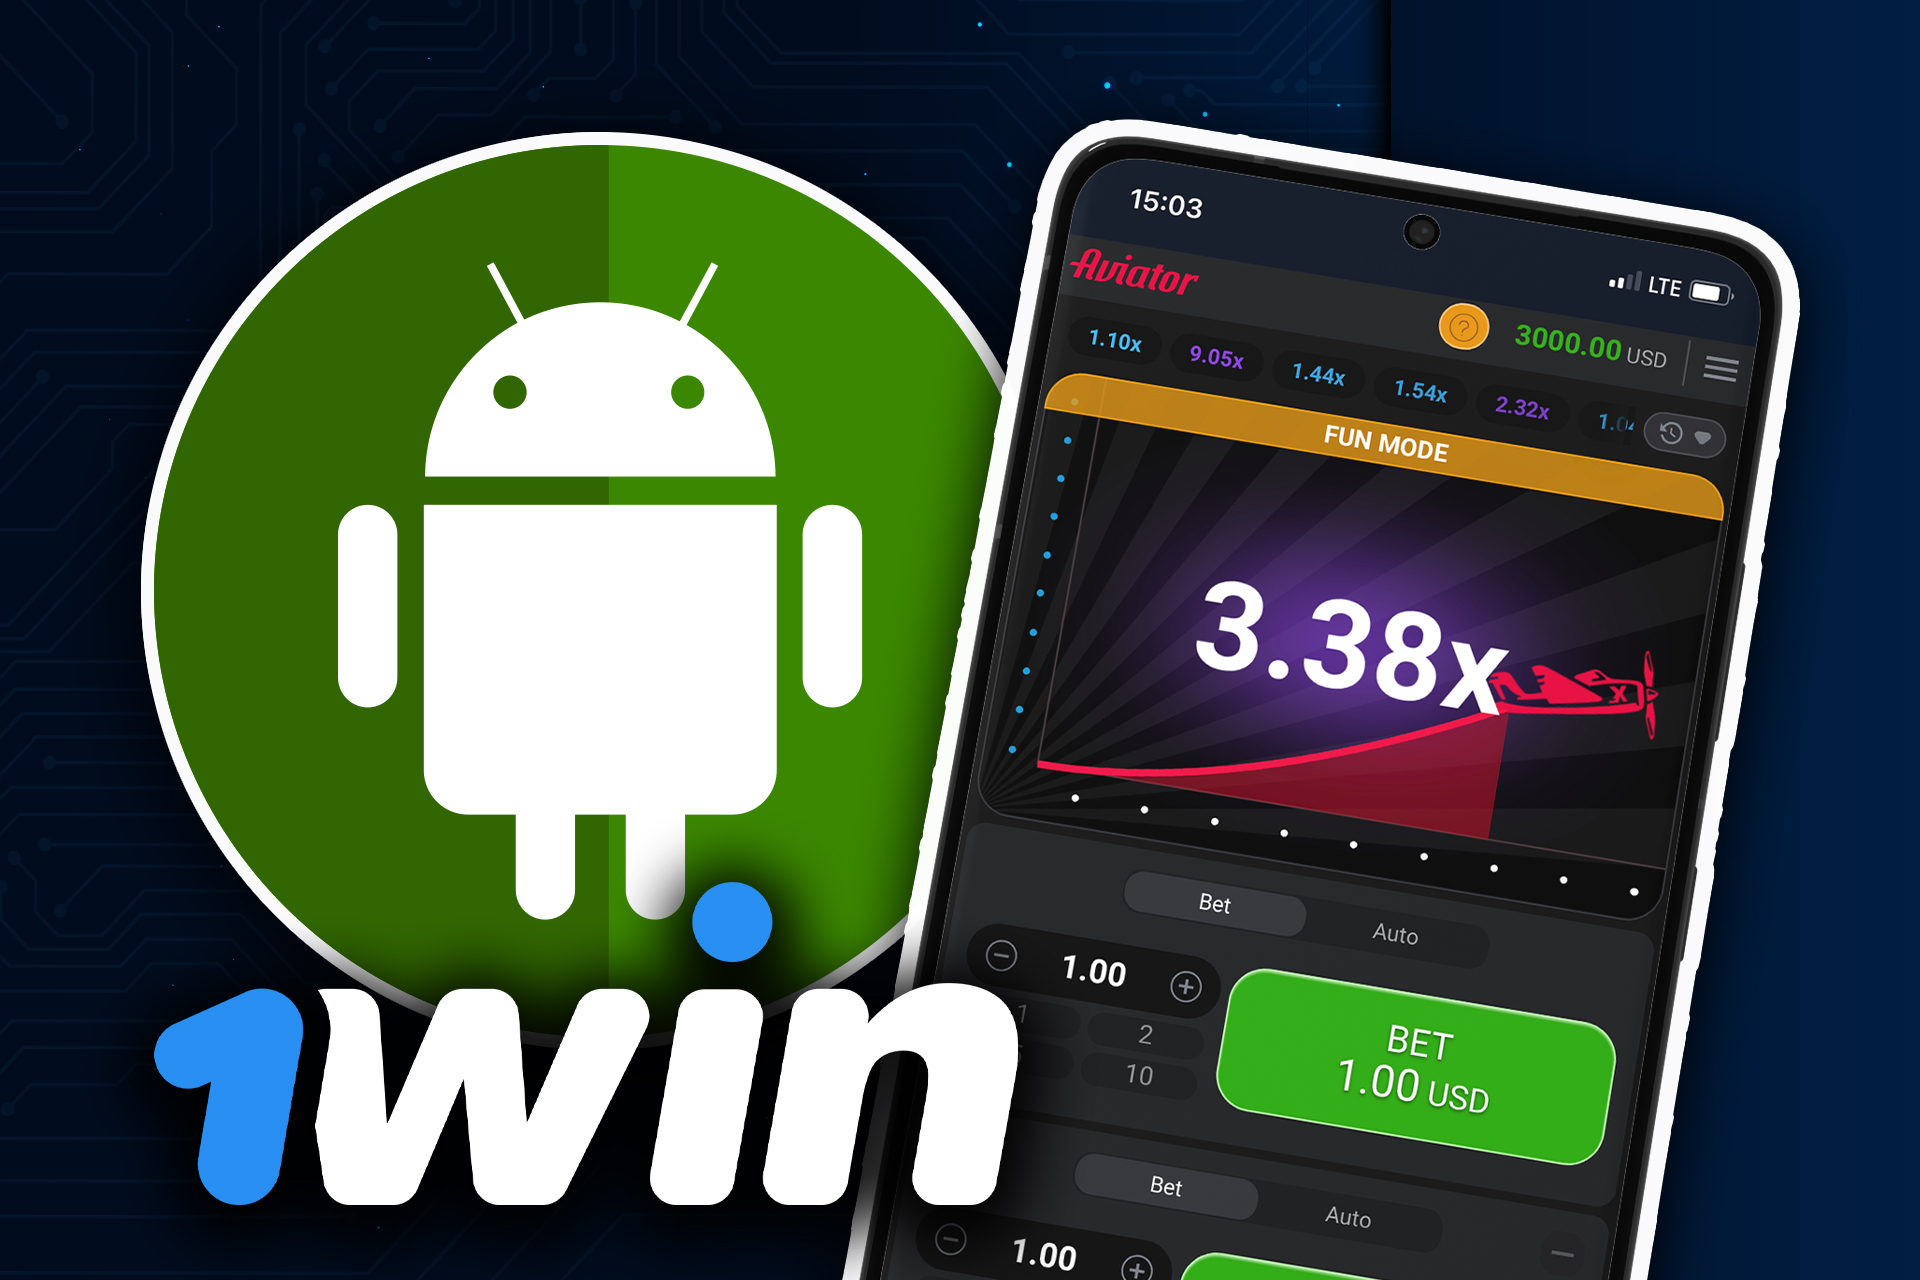 Download the 1win app on your Android to play Aviator on the smartphone.